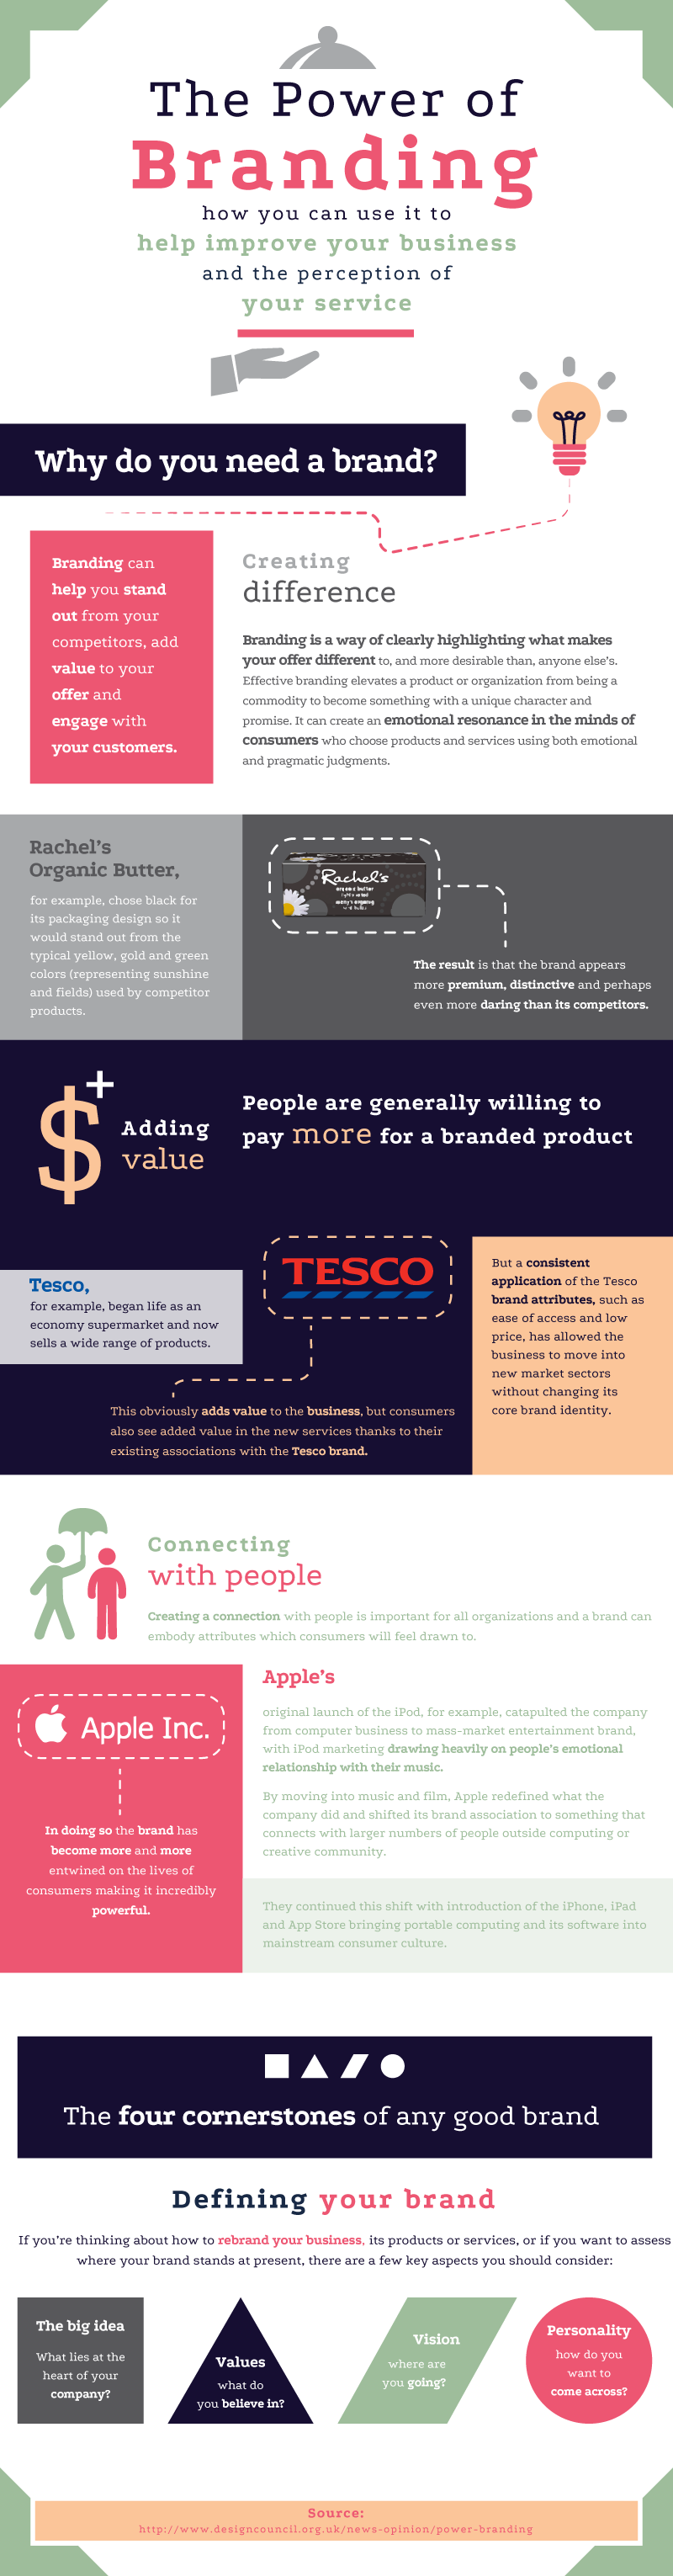 The Power of Branding [Infographic]